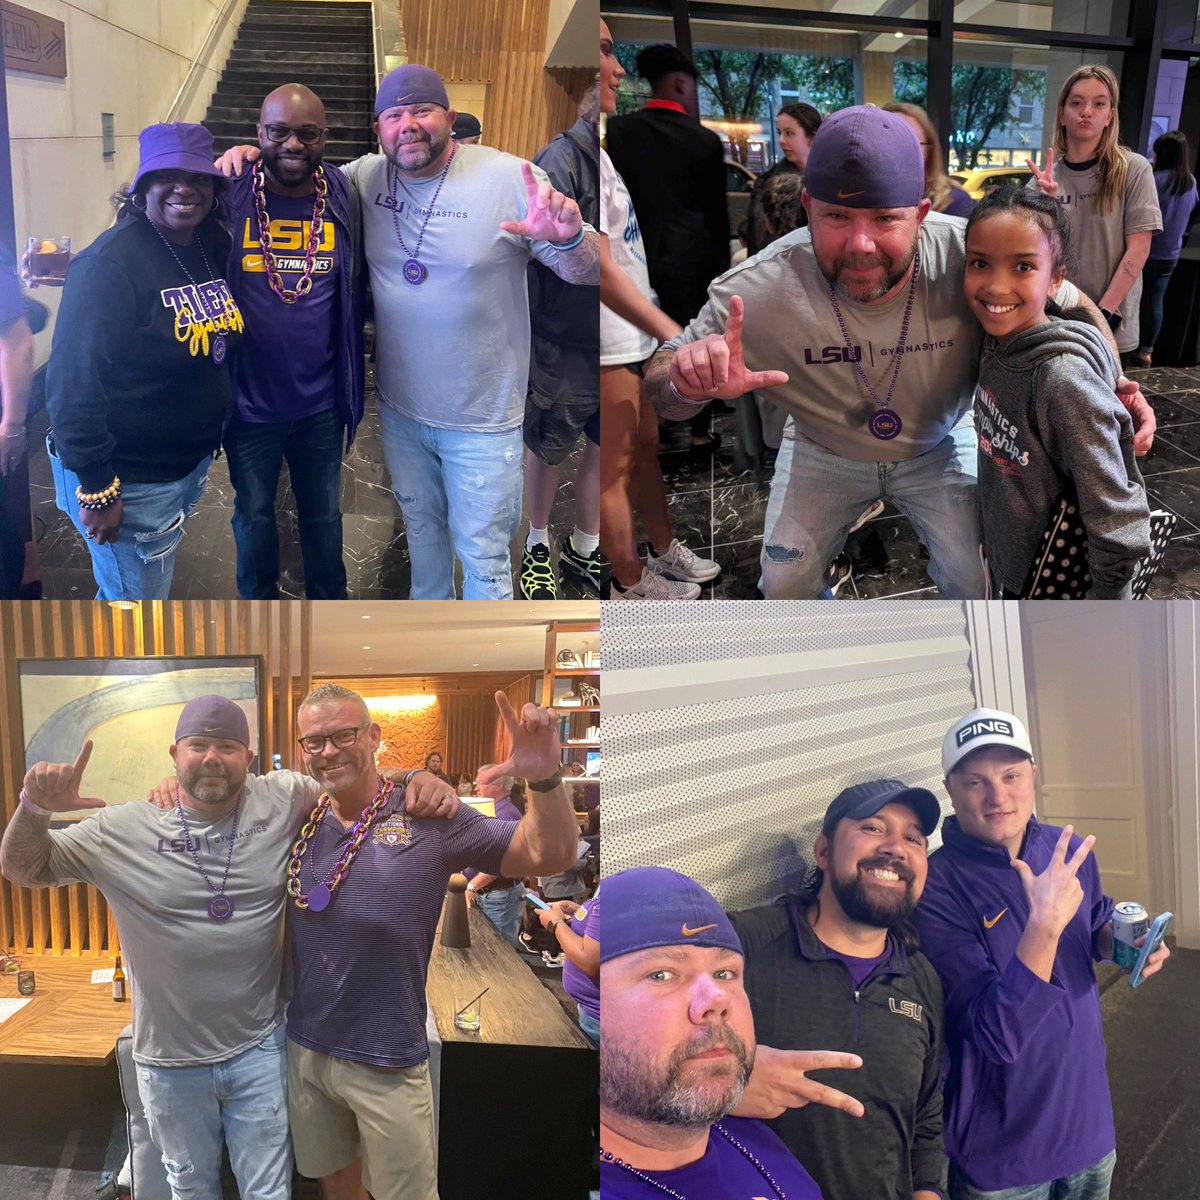 It’s a party it’s a party it’s a party!!! #GeauxTigers #ThePowerhouse #NationalChamps @lsutac @DSports24 @Pegredd @Mikdup_8 @LsuColby @lsu_dailynews @TigersAvenue @SSN_SEC